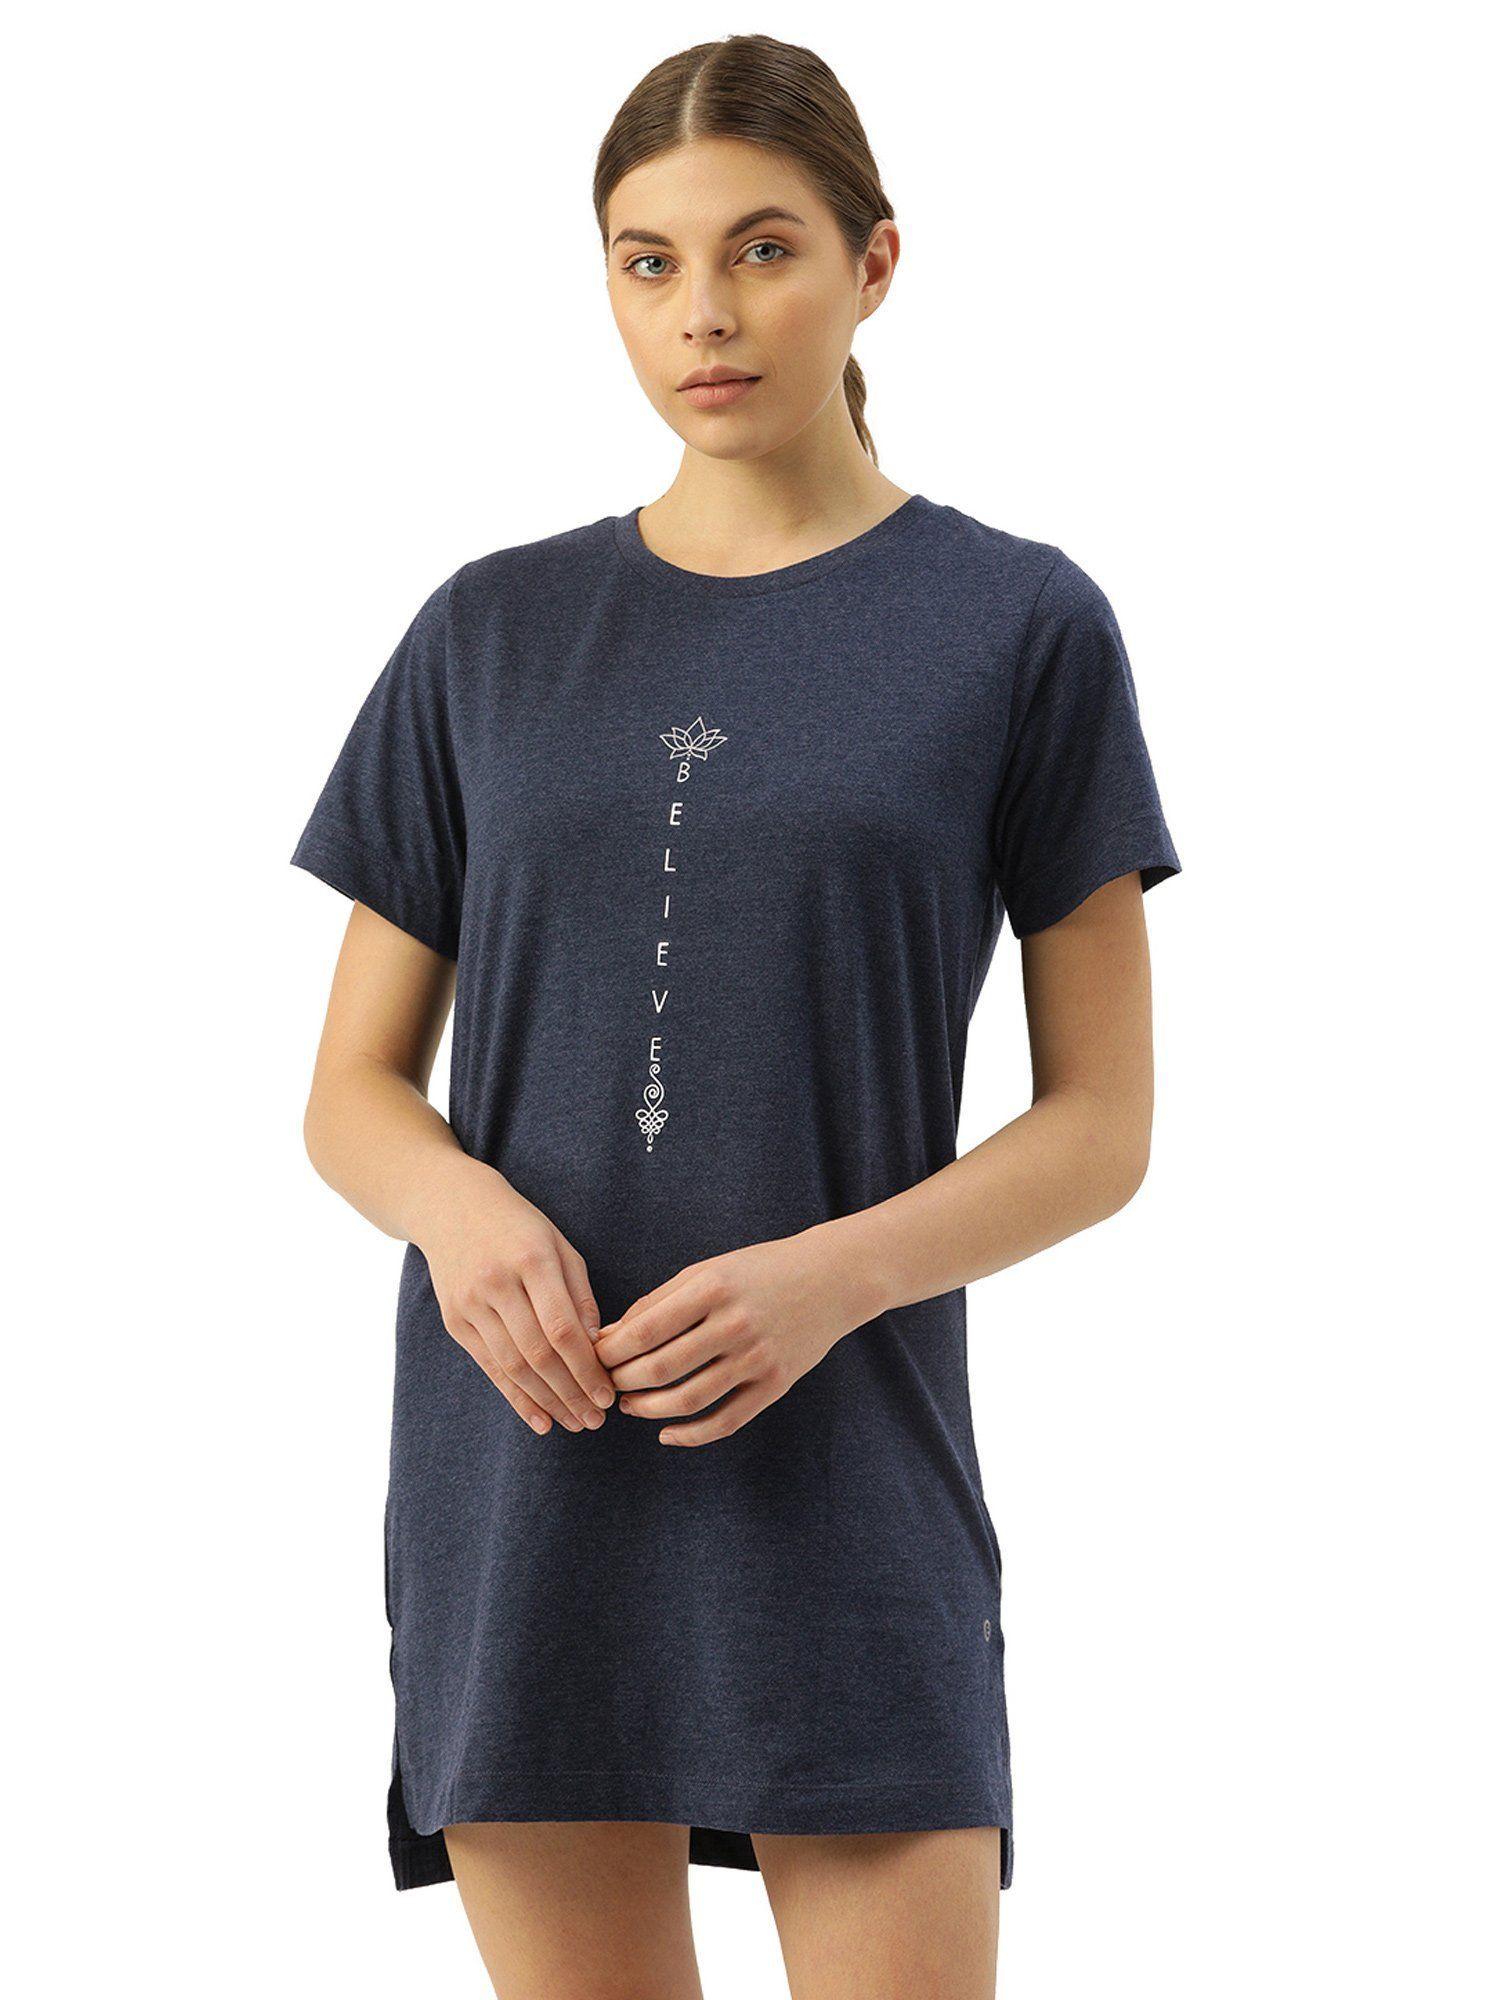 essentials e061 women's relaxed fit tunic tee - blue